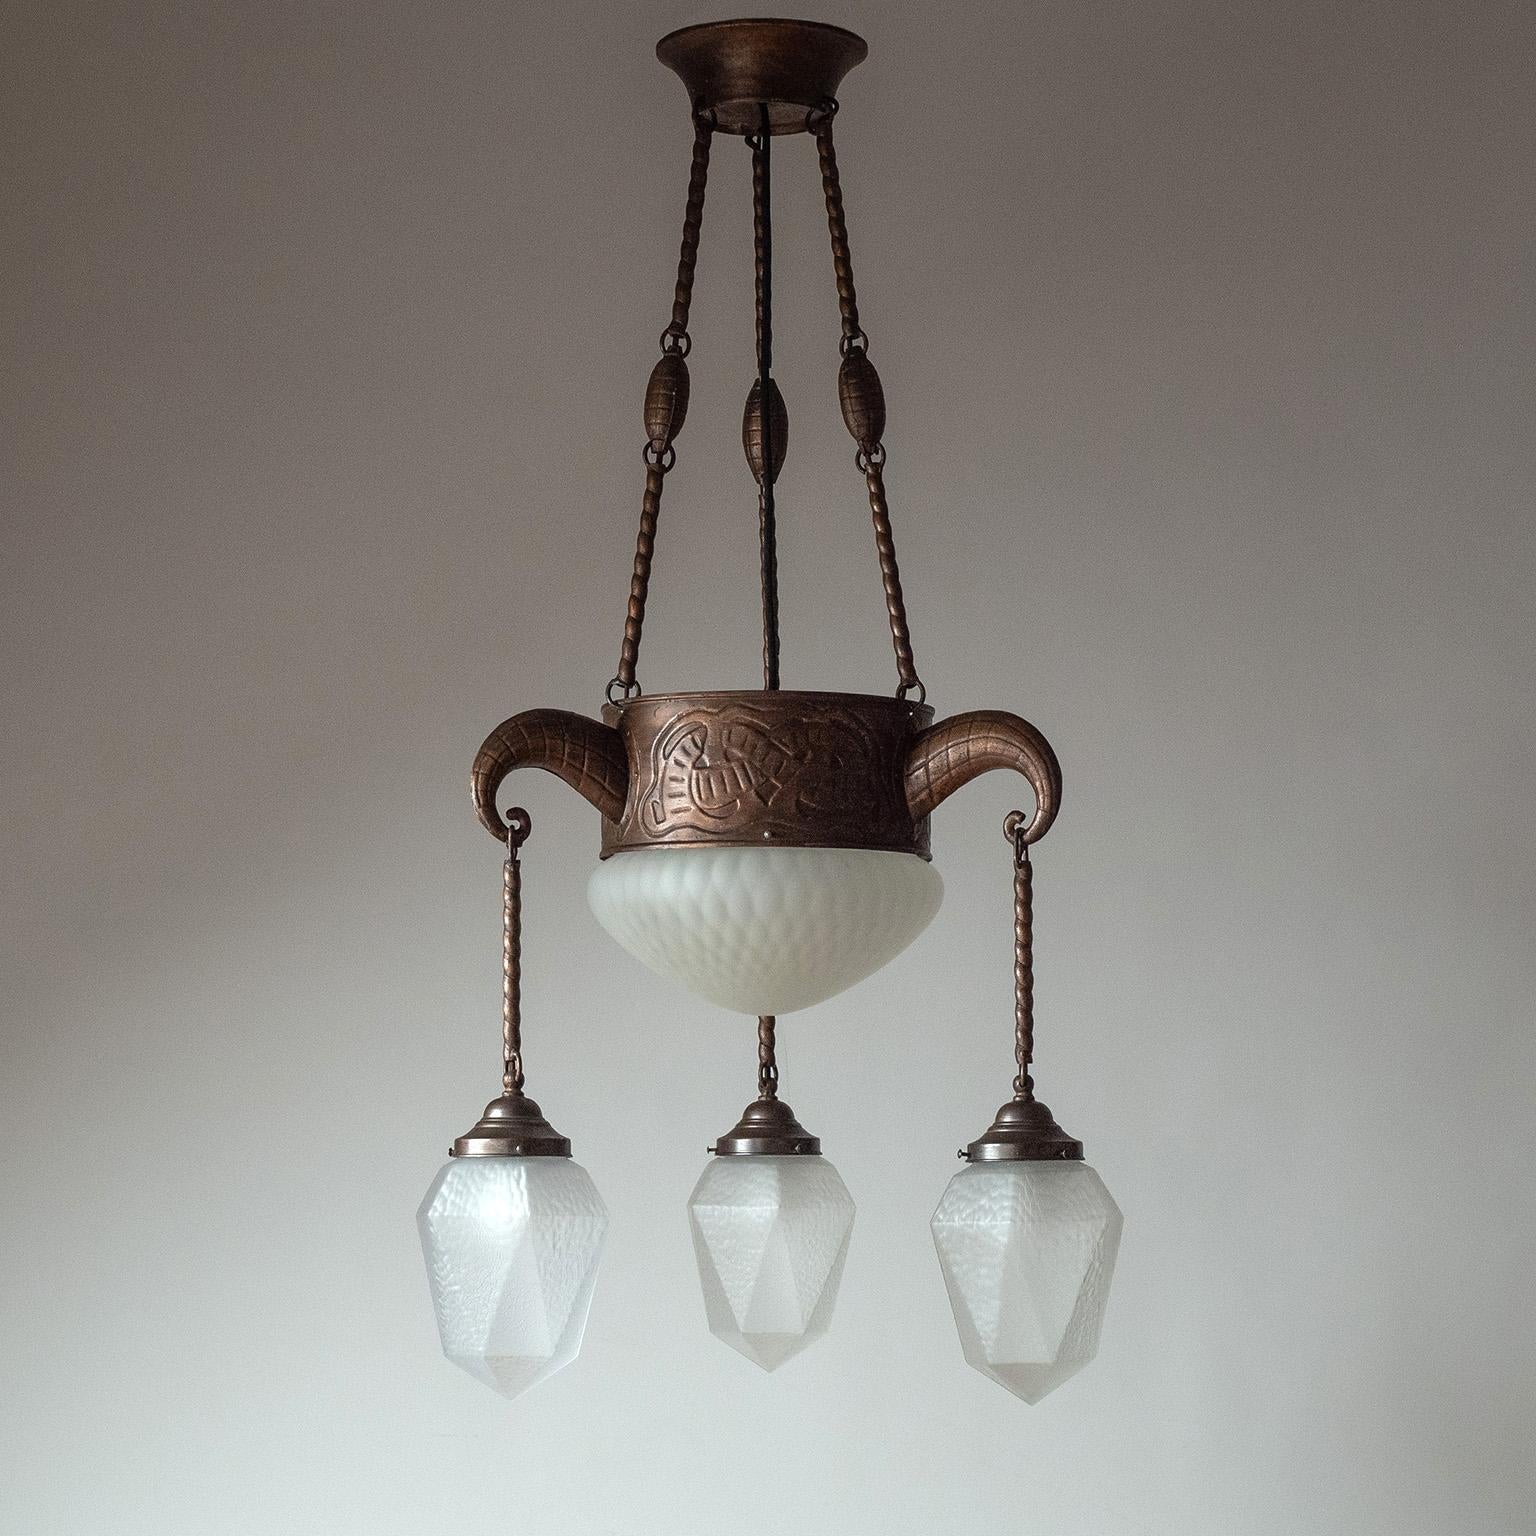 Rare German Jugendstil copper and glass suspension chandelier from the early 20th century. Copper-plated steel structure, embossed with ornate details, and delicate textured satin glass diffusers. Very nice original condition with minimal patina.